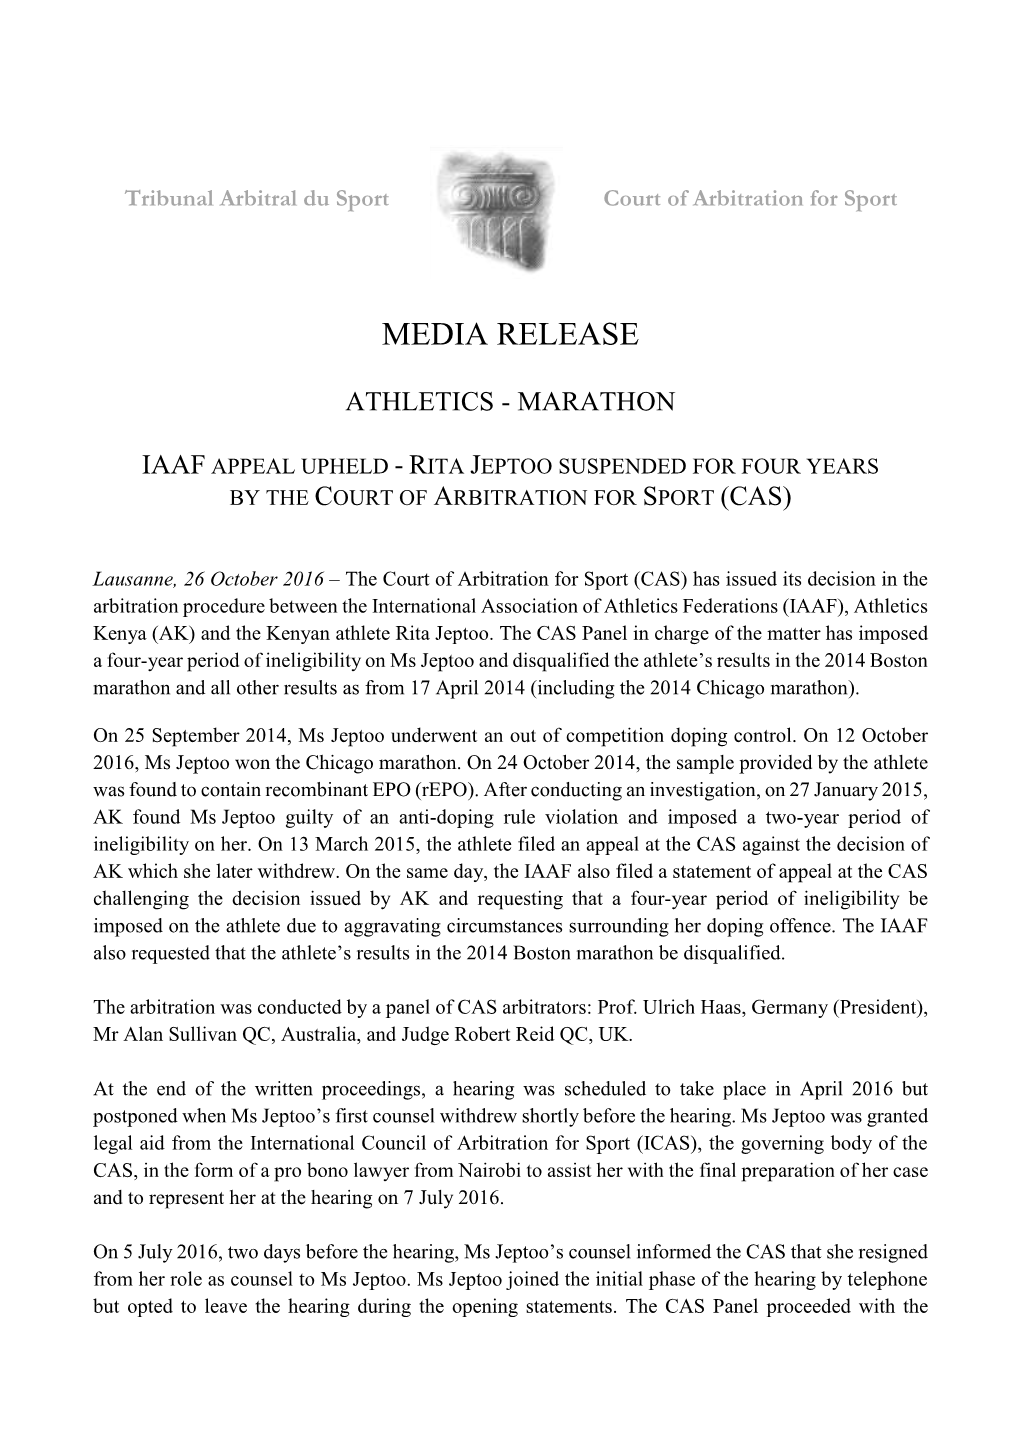 Iaaf Appeal Upheld - Rita Jeptoo Suspended for Four Years by the Court of Arbitration for Sport (Cas)